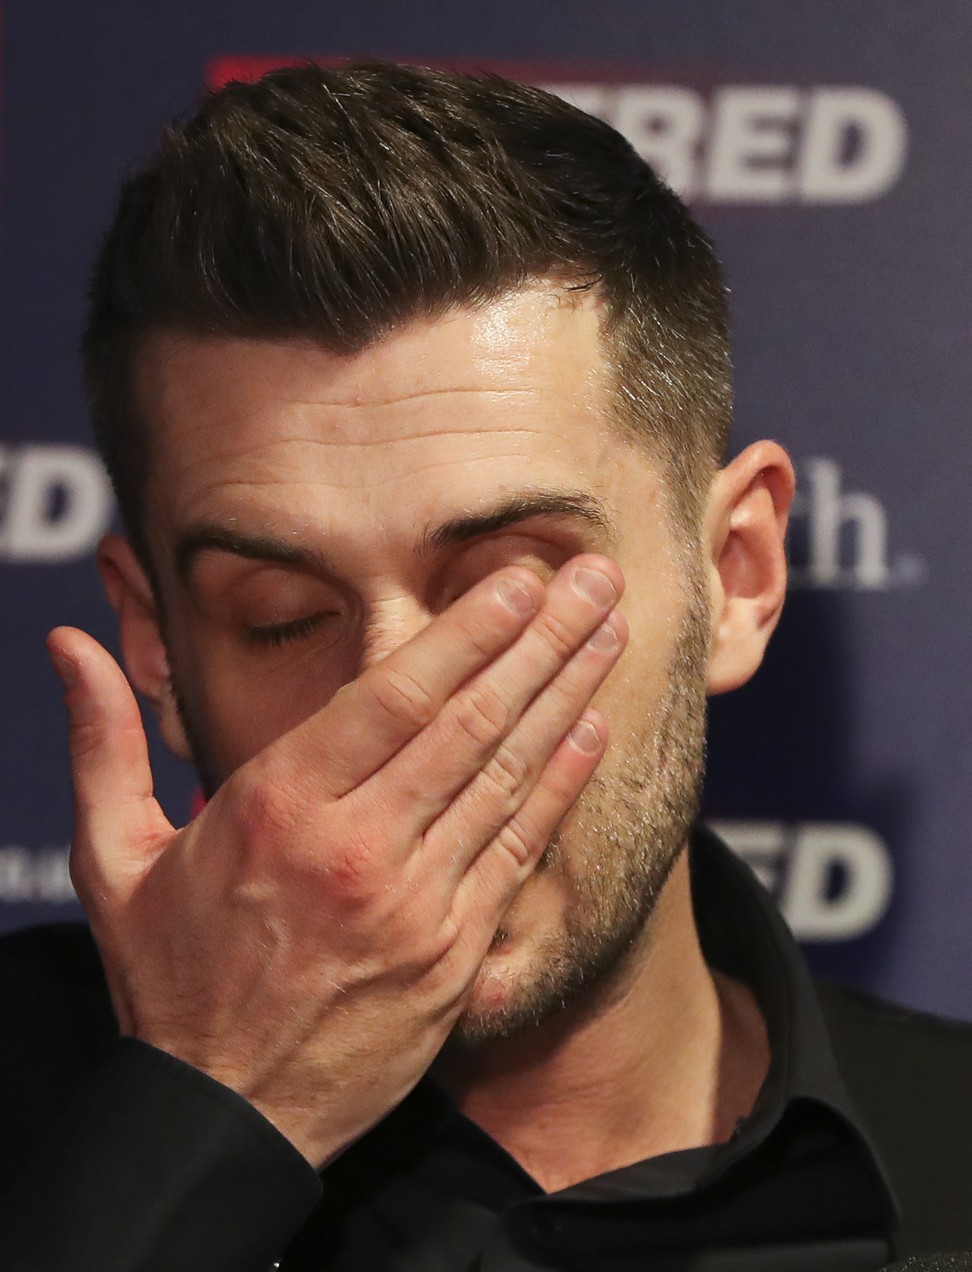 Mark Selby is disappointed he has been eliminated in the first round. Photo: Xinhua